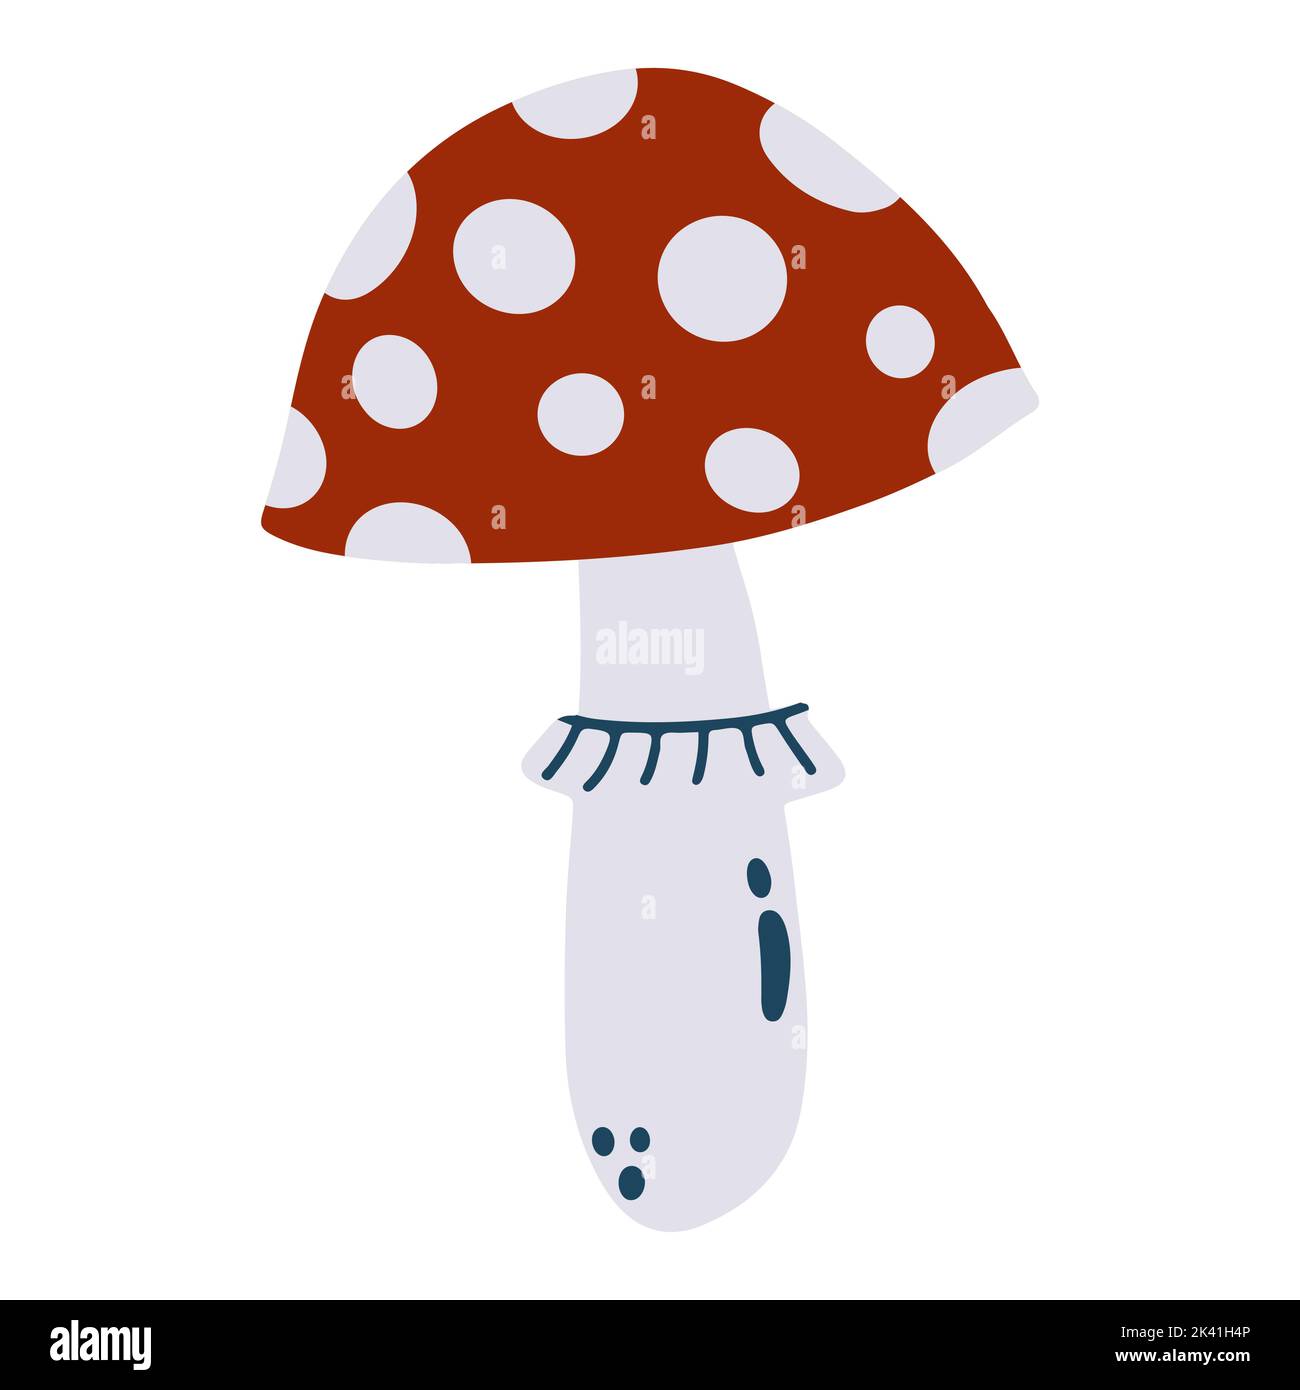 Hand drawn amanita mushroom in cartoon flat style isolated on white background. Vector illustration of fly-agaric. Stock Vector